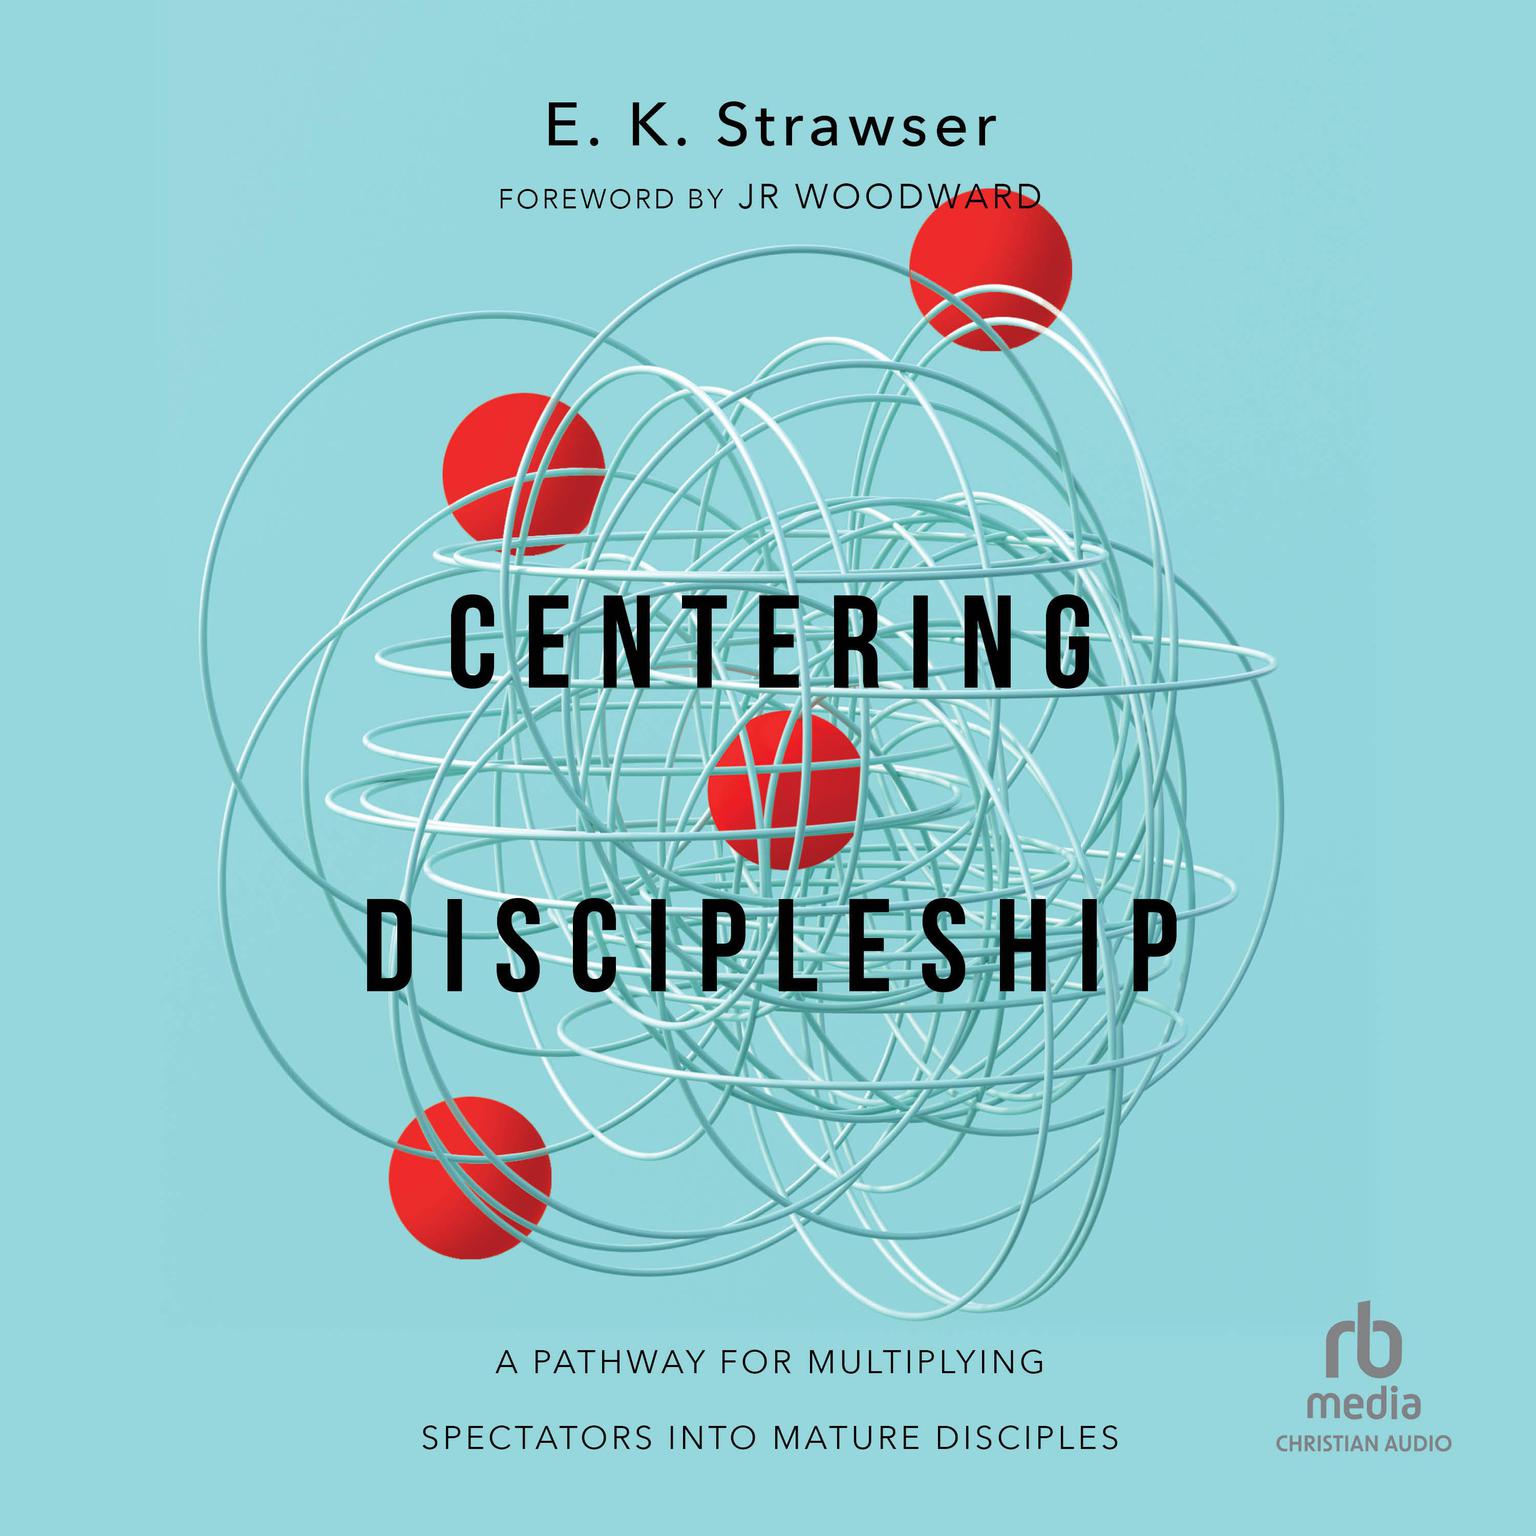 Centering Discipleship: A Pathway for Multiplying Spectators into Mature Disciples Audiobook, by E. K. Strawser